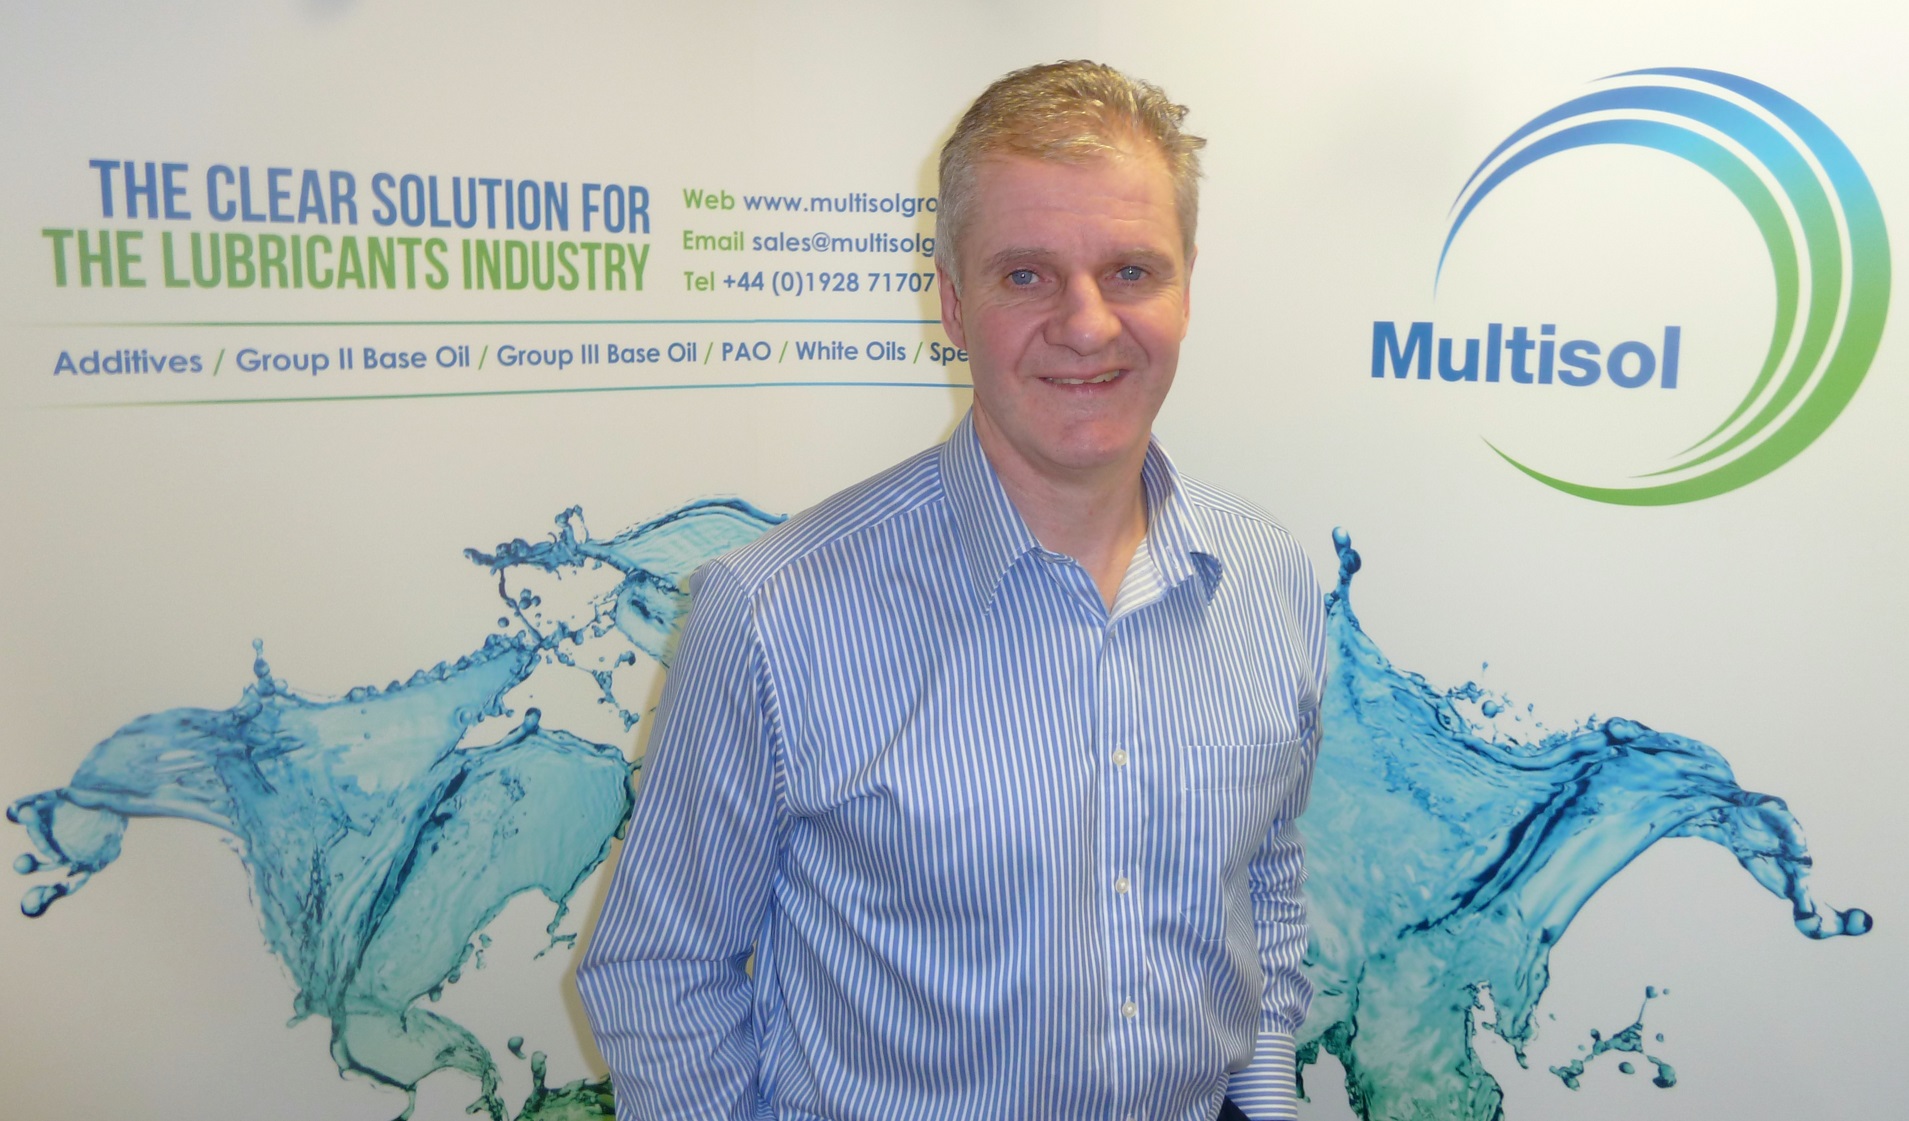 MULTISOL CONFIRMS KEVIN WRIGHT APPOINTMENT